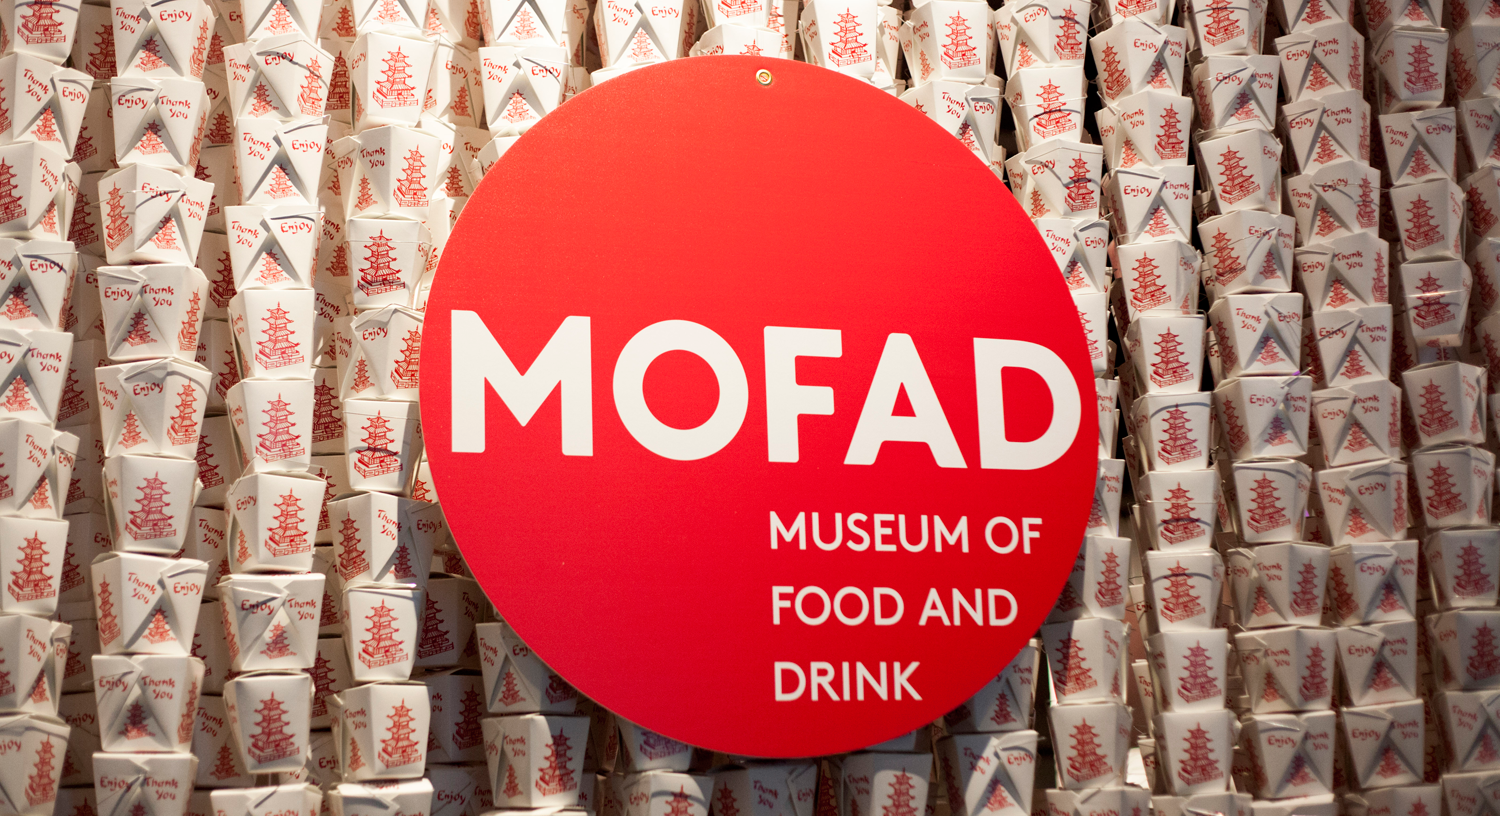  The Museum of Food and Drink Shares Stories of Food and Community in NYC.